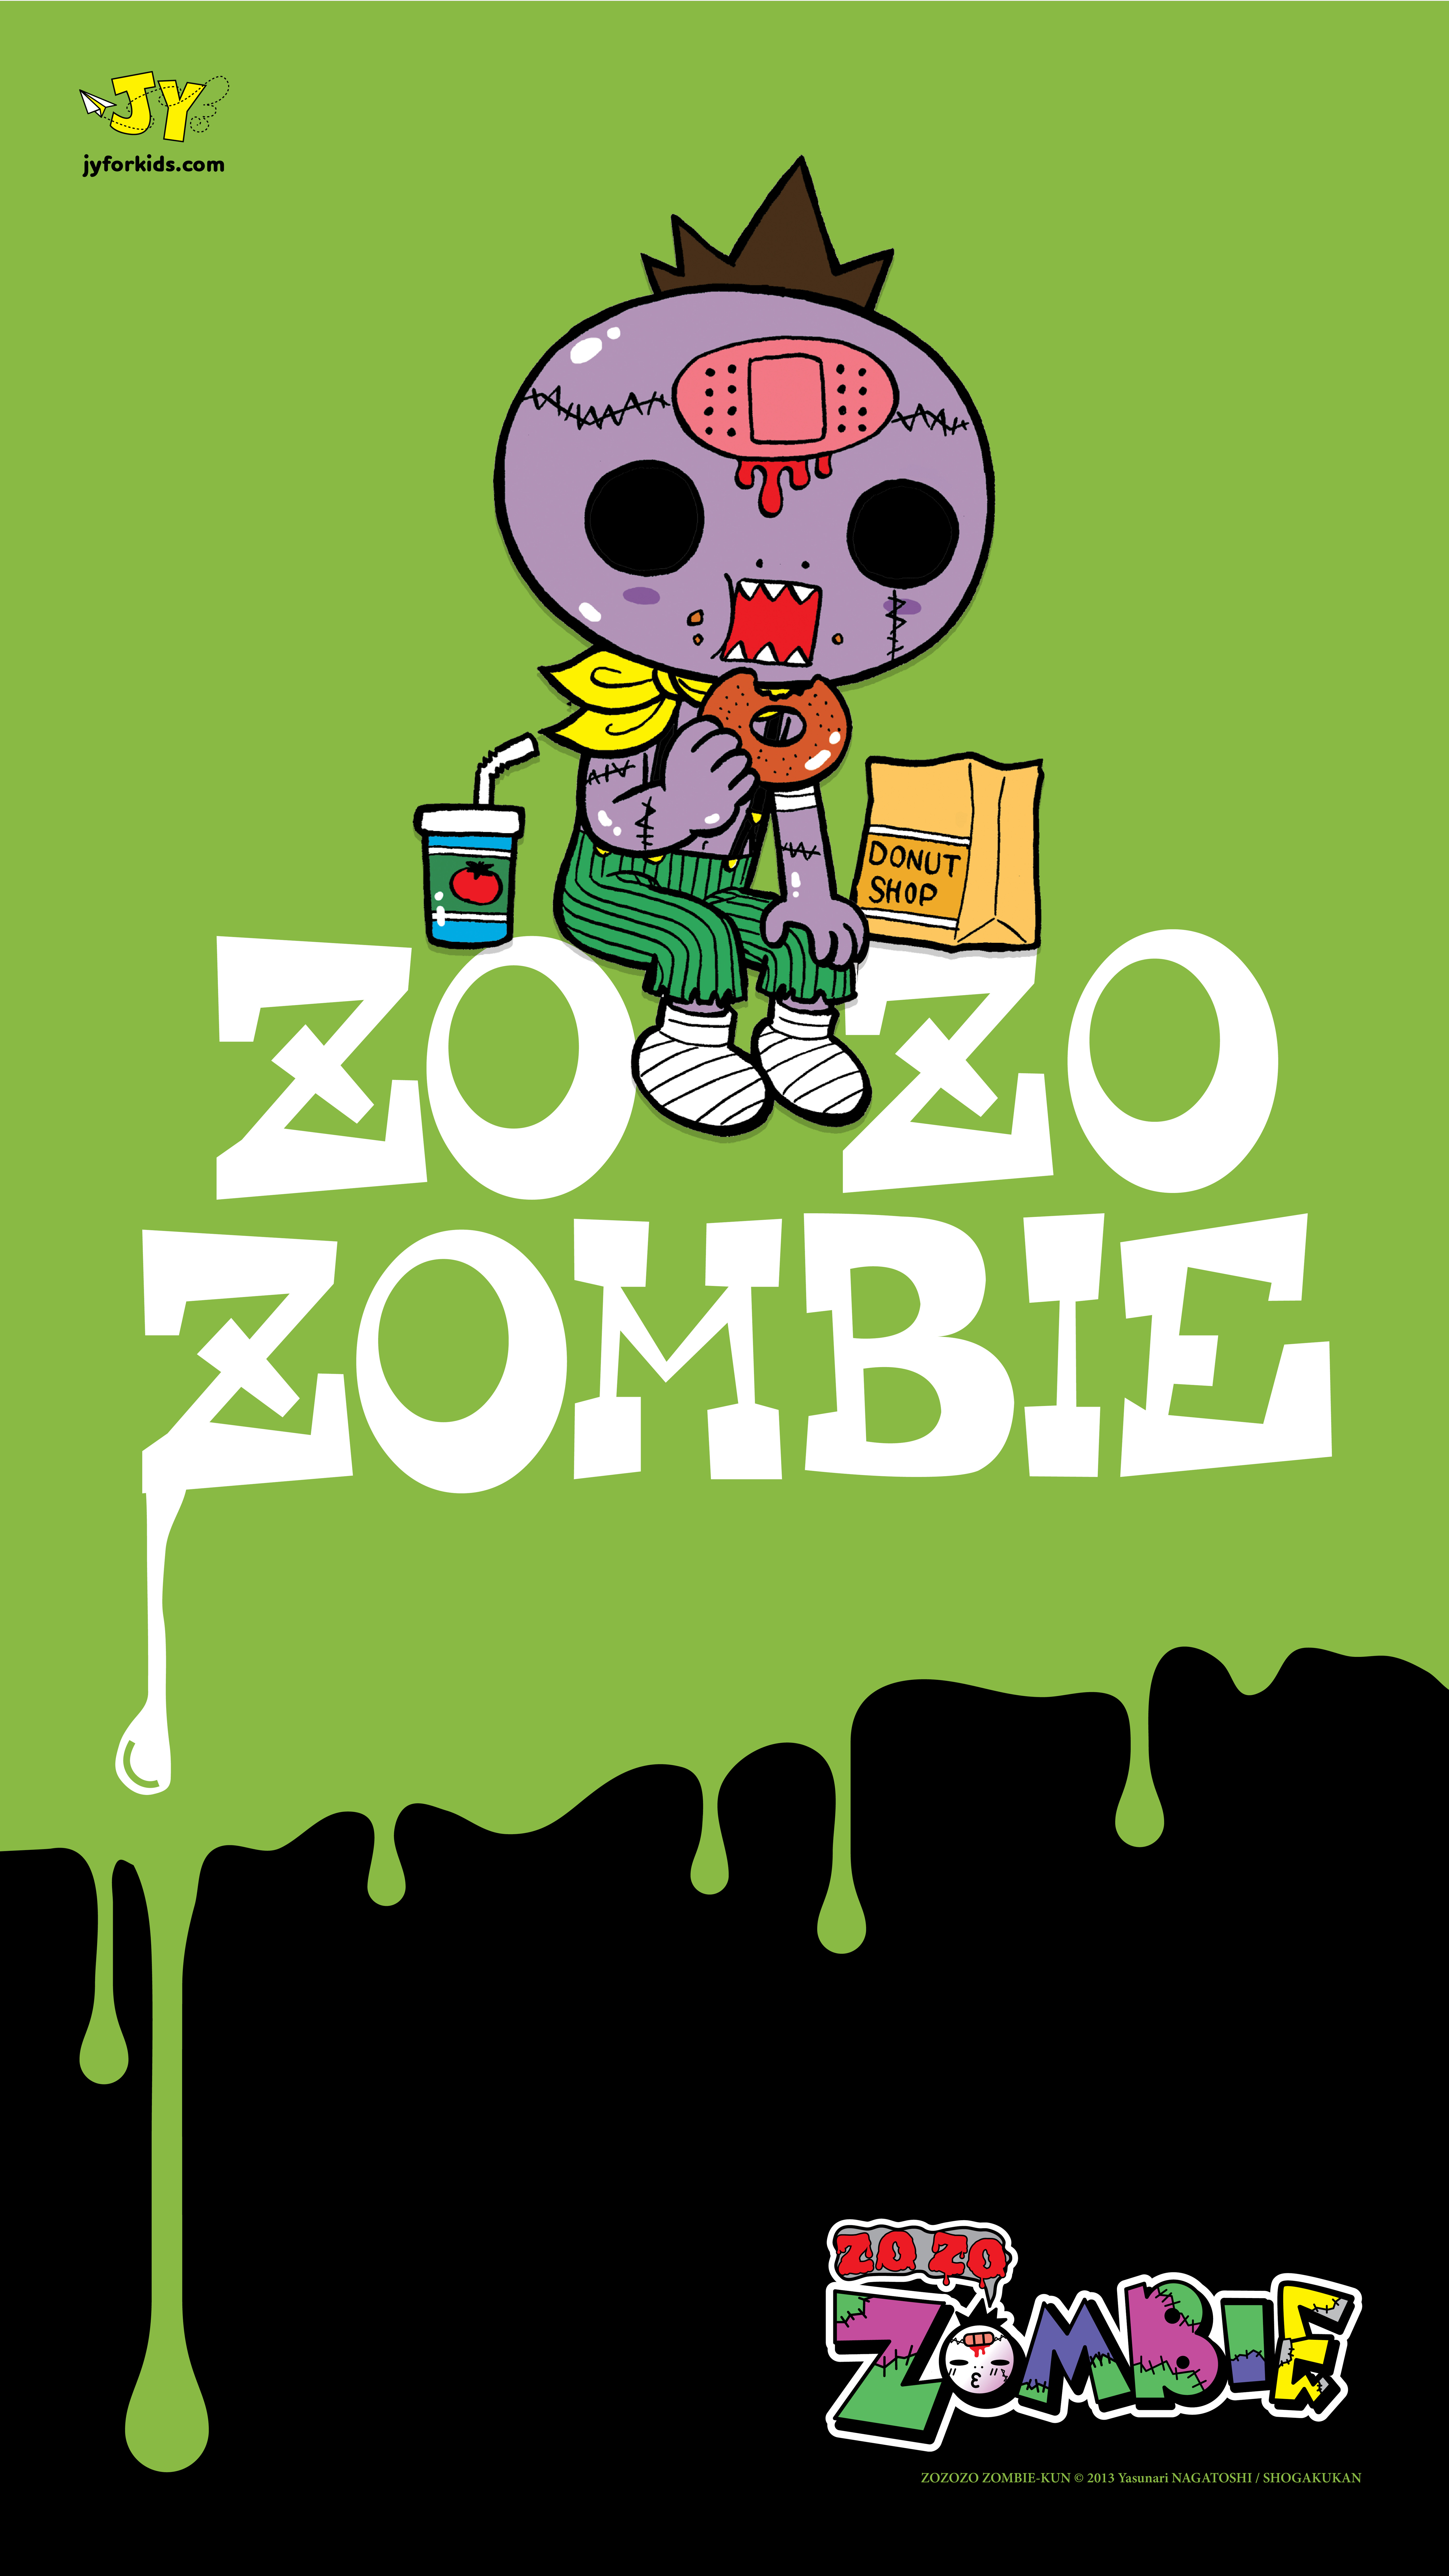 Zombie-ANDROID_11